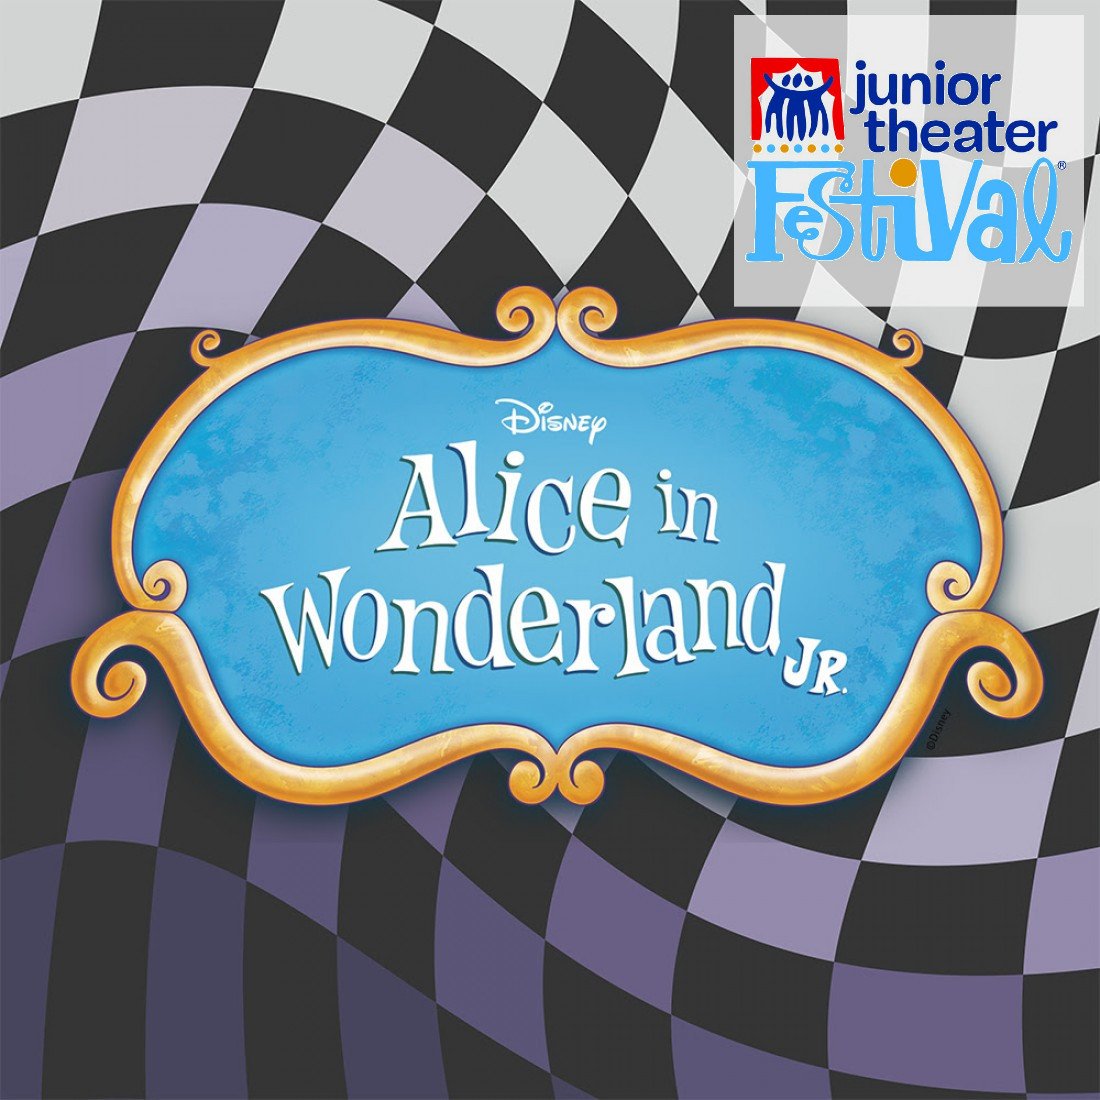 We&rsquo;re excited to be performing the brand new MTI musical, Alice in Wonderland, Jr. this Fall (more info coming soon!). We are also bringing Alice to JTF this coming January!  Register now for this amazing opportunity!

What is Junior Theater Fe